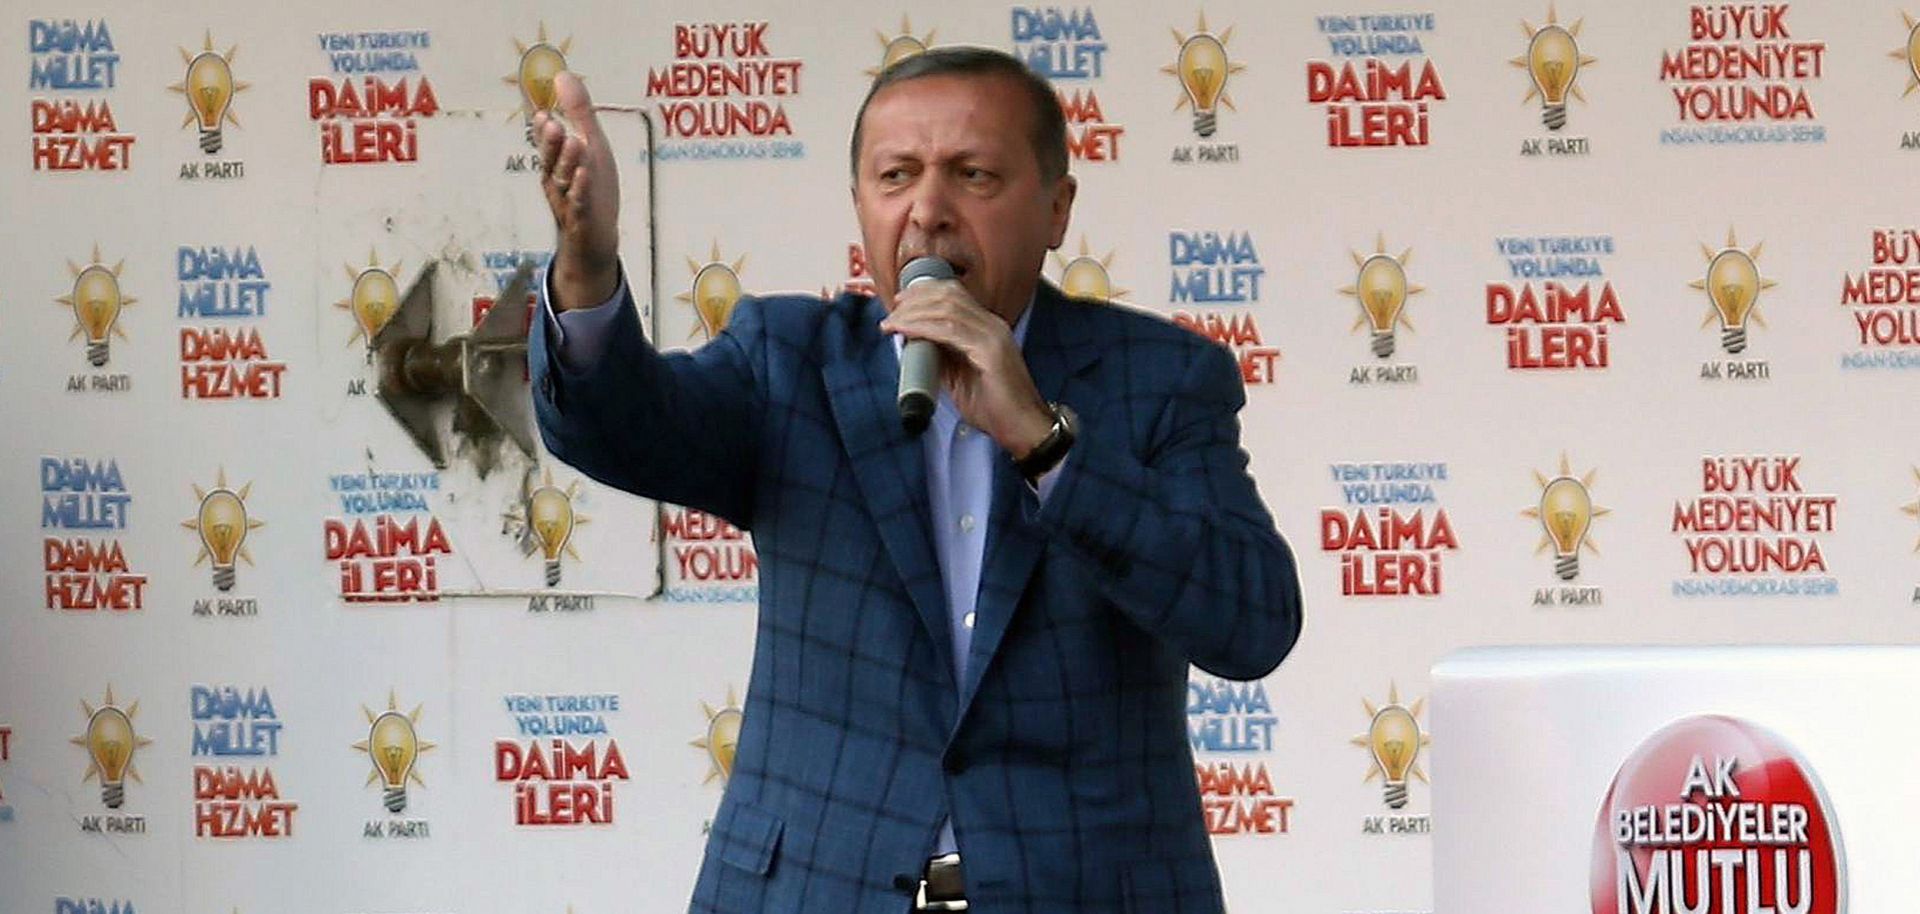 Turkish Prime Minister Recep Tayyip Erdogan addresses a crowd during an election rally in Ankara on March 22.